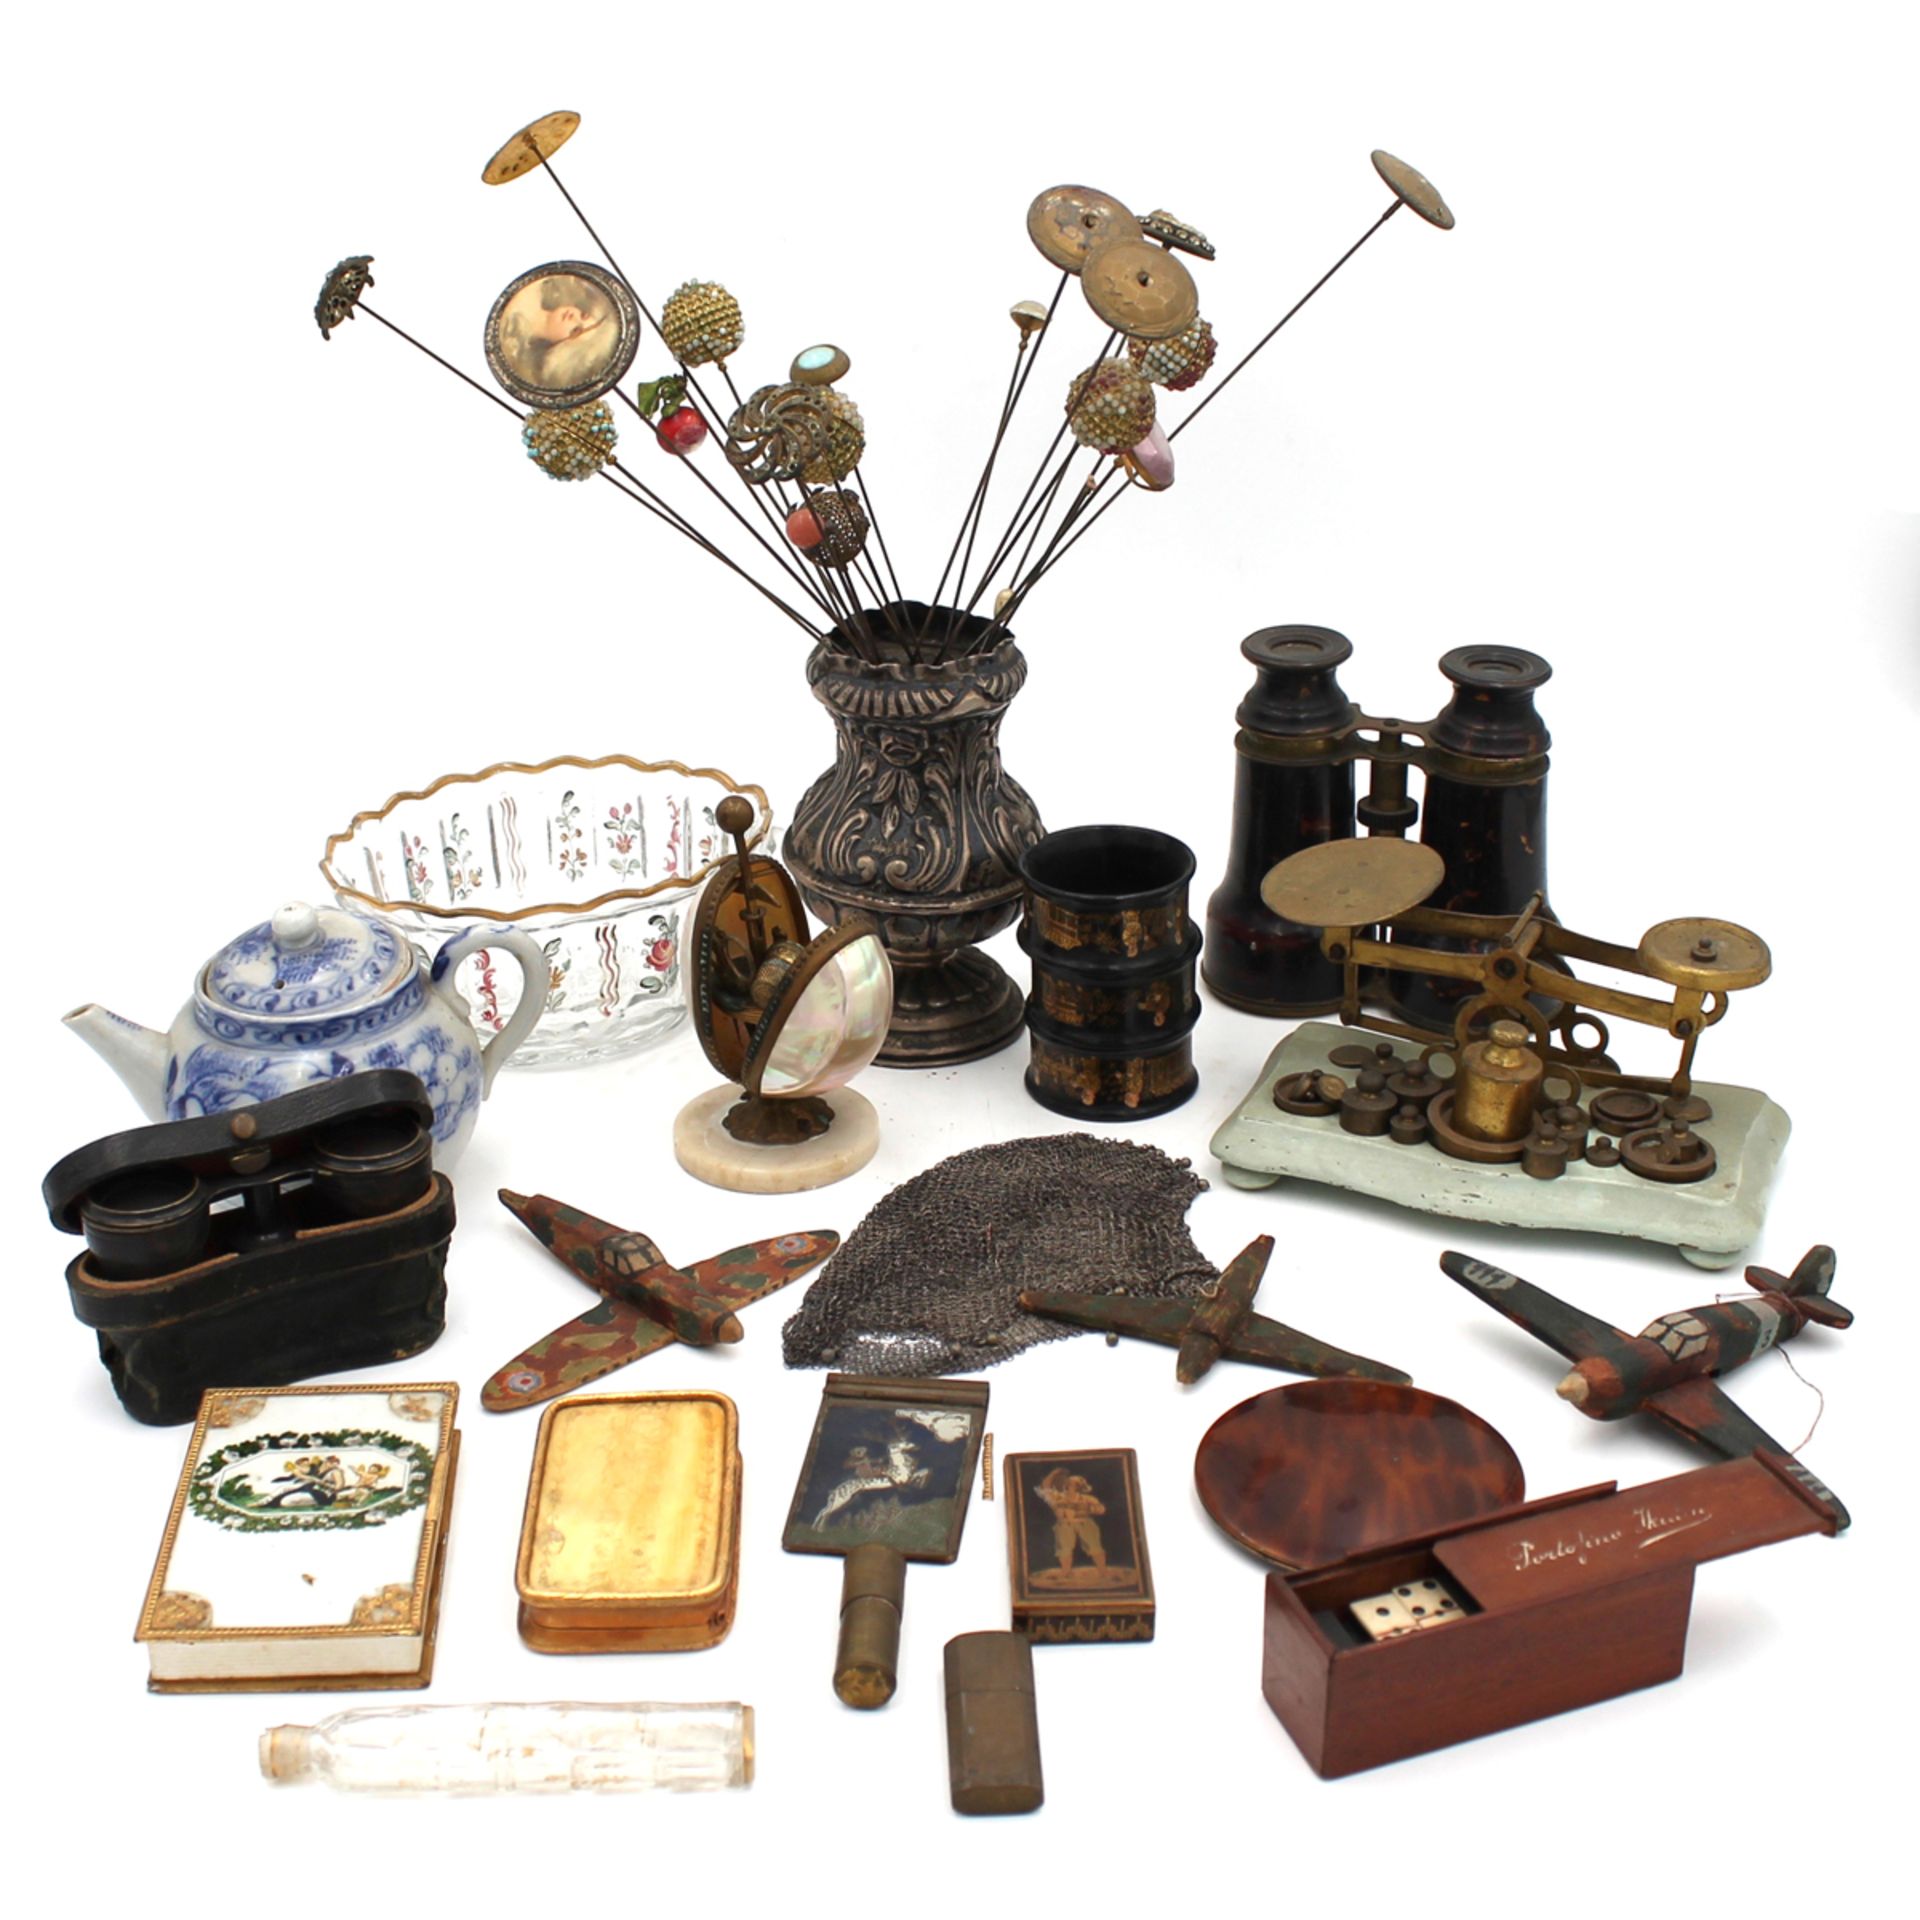 LOTTO DI OGGETTI DI VARIO GENERE - LOT OF OBJECTS OF VARIOUS KIND